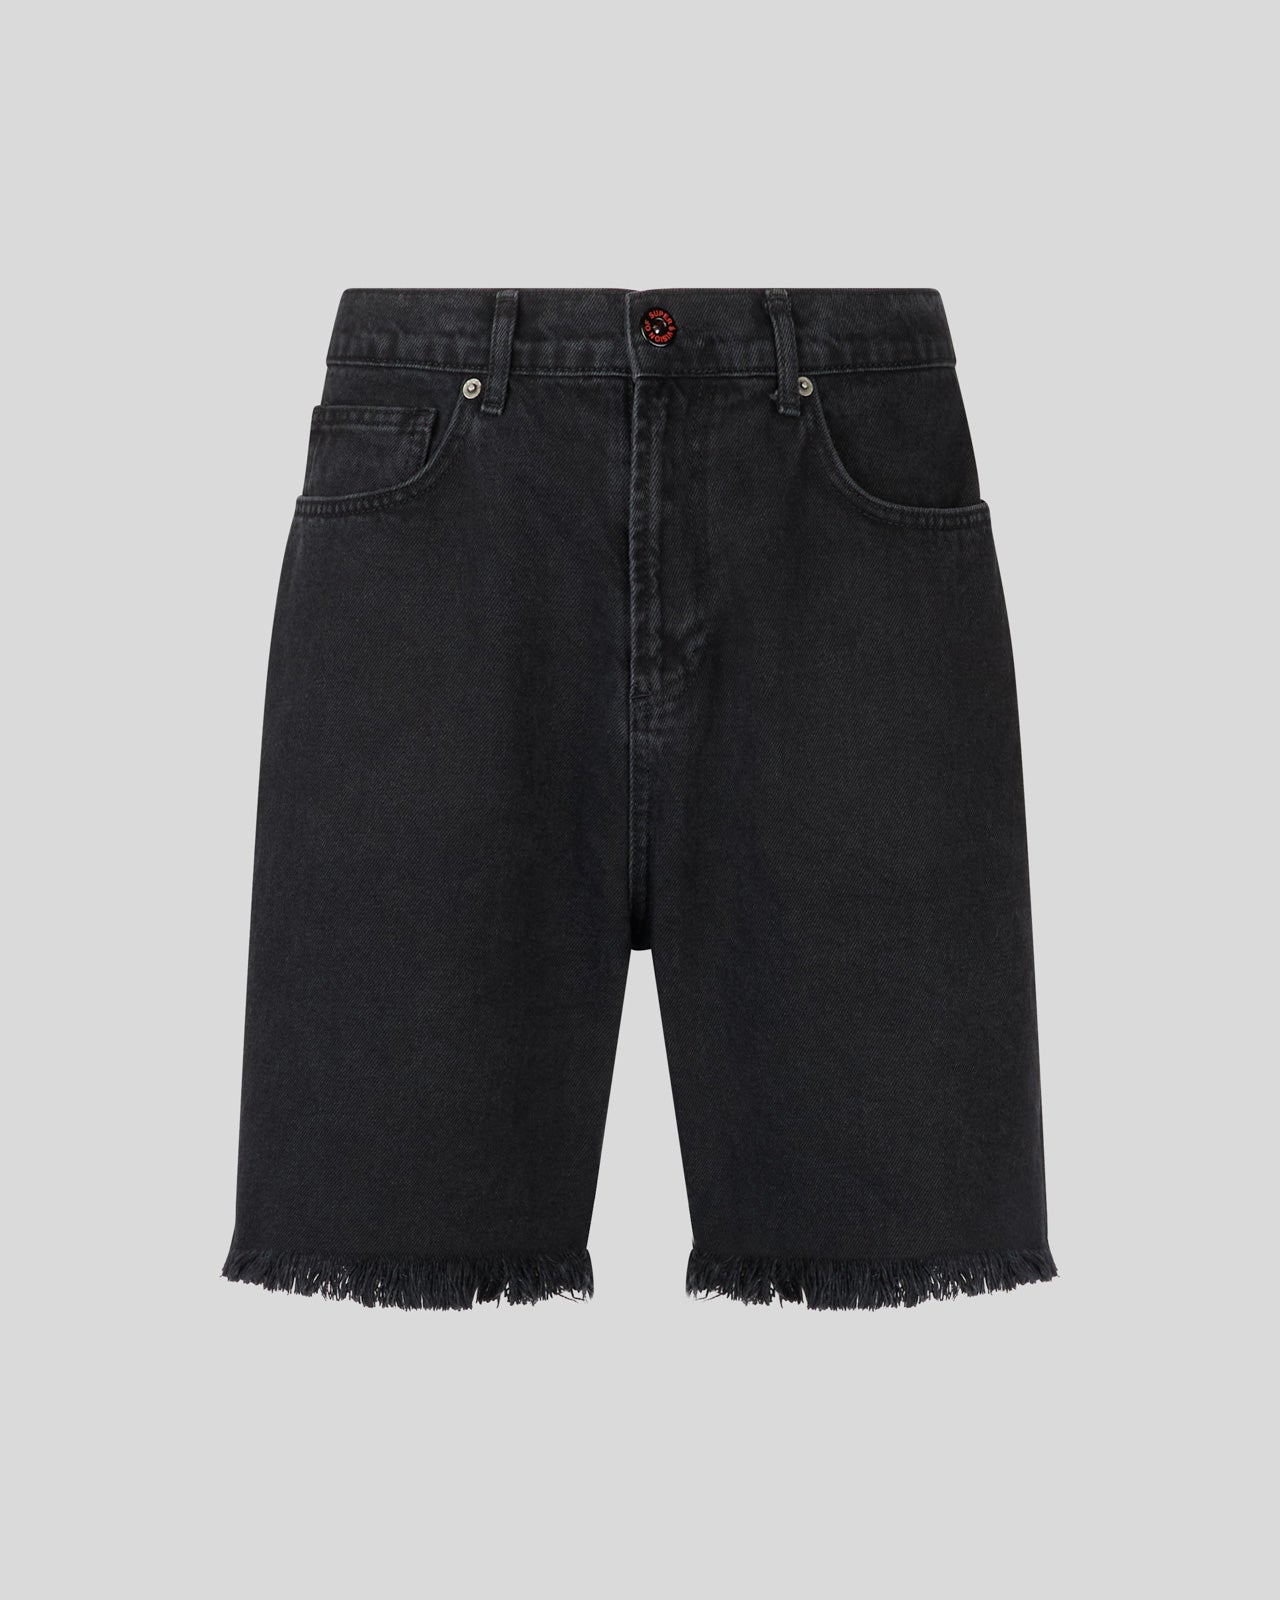 BLACK DENIM SHORTS WITH V-S GOTIC PATCHES